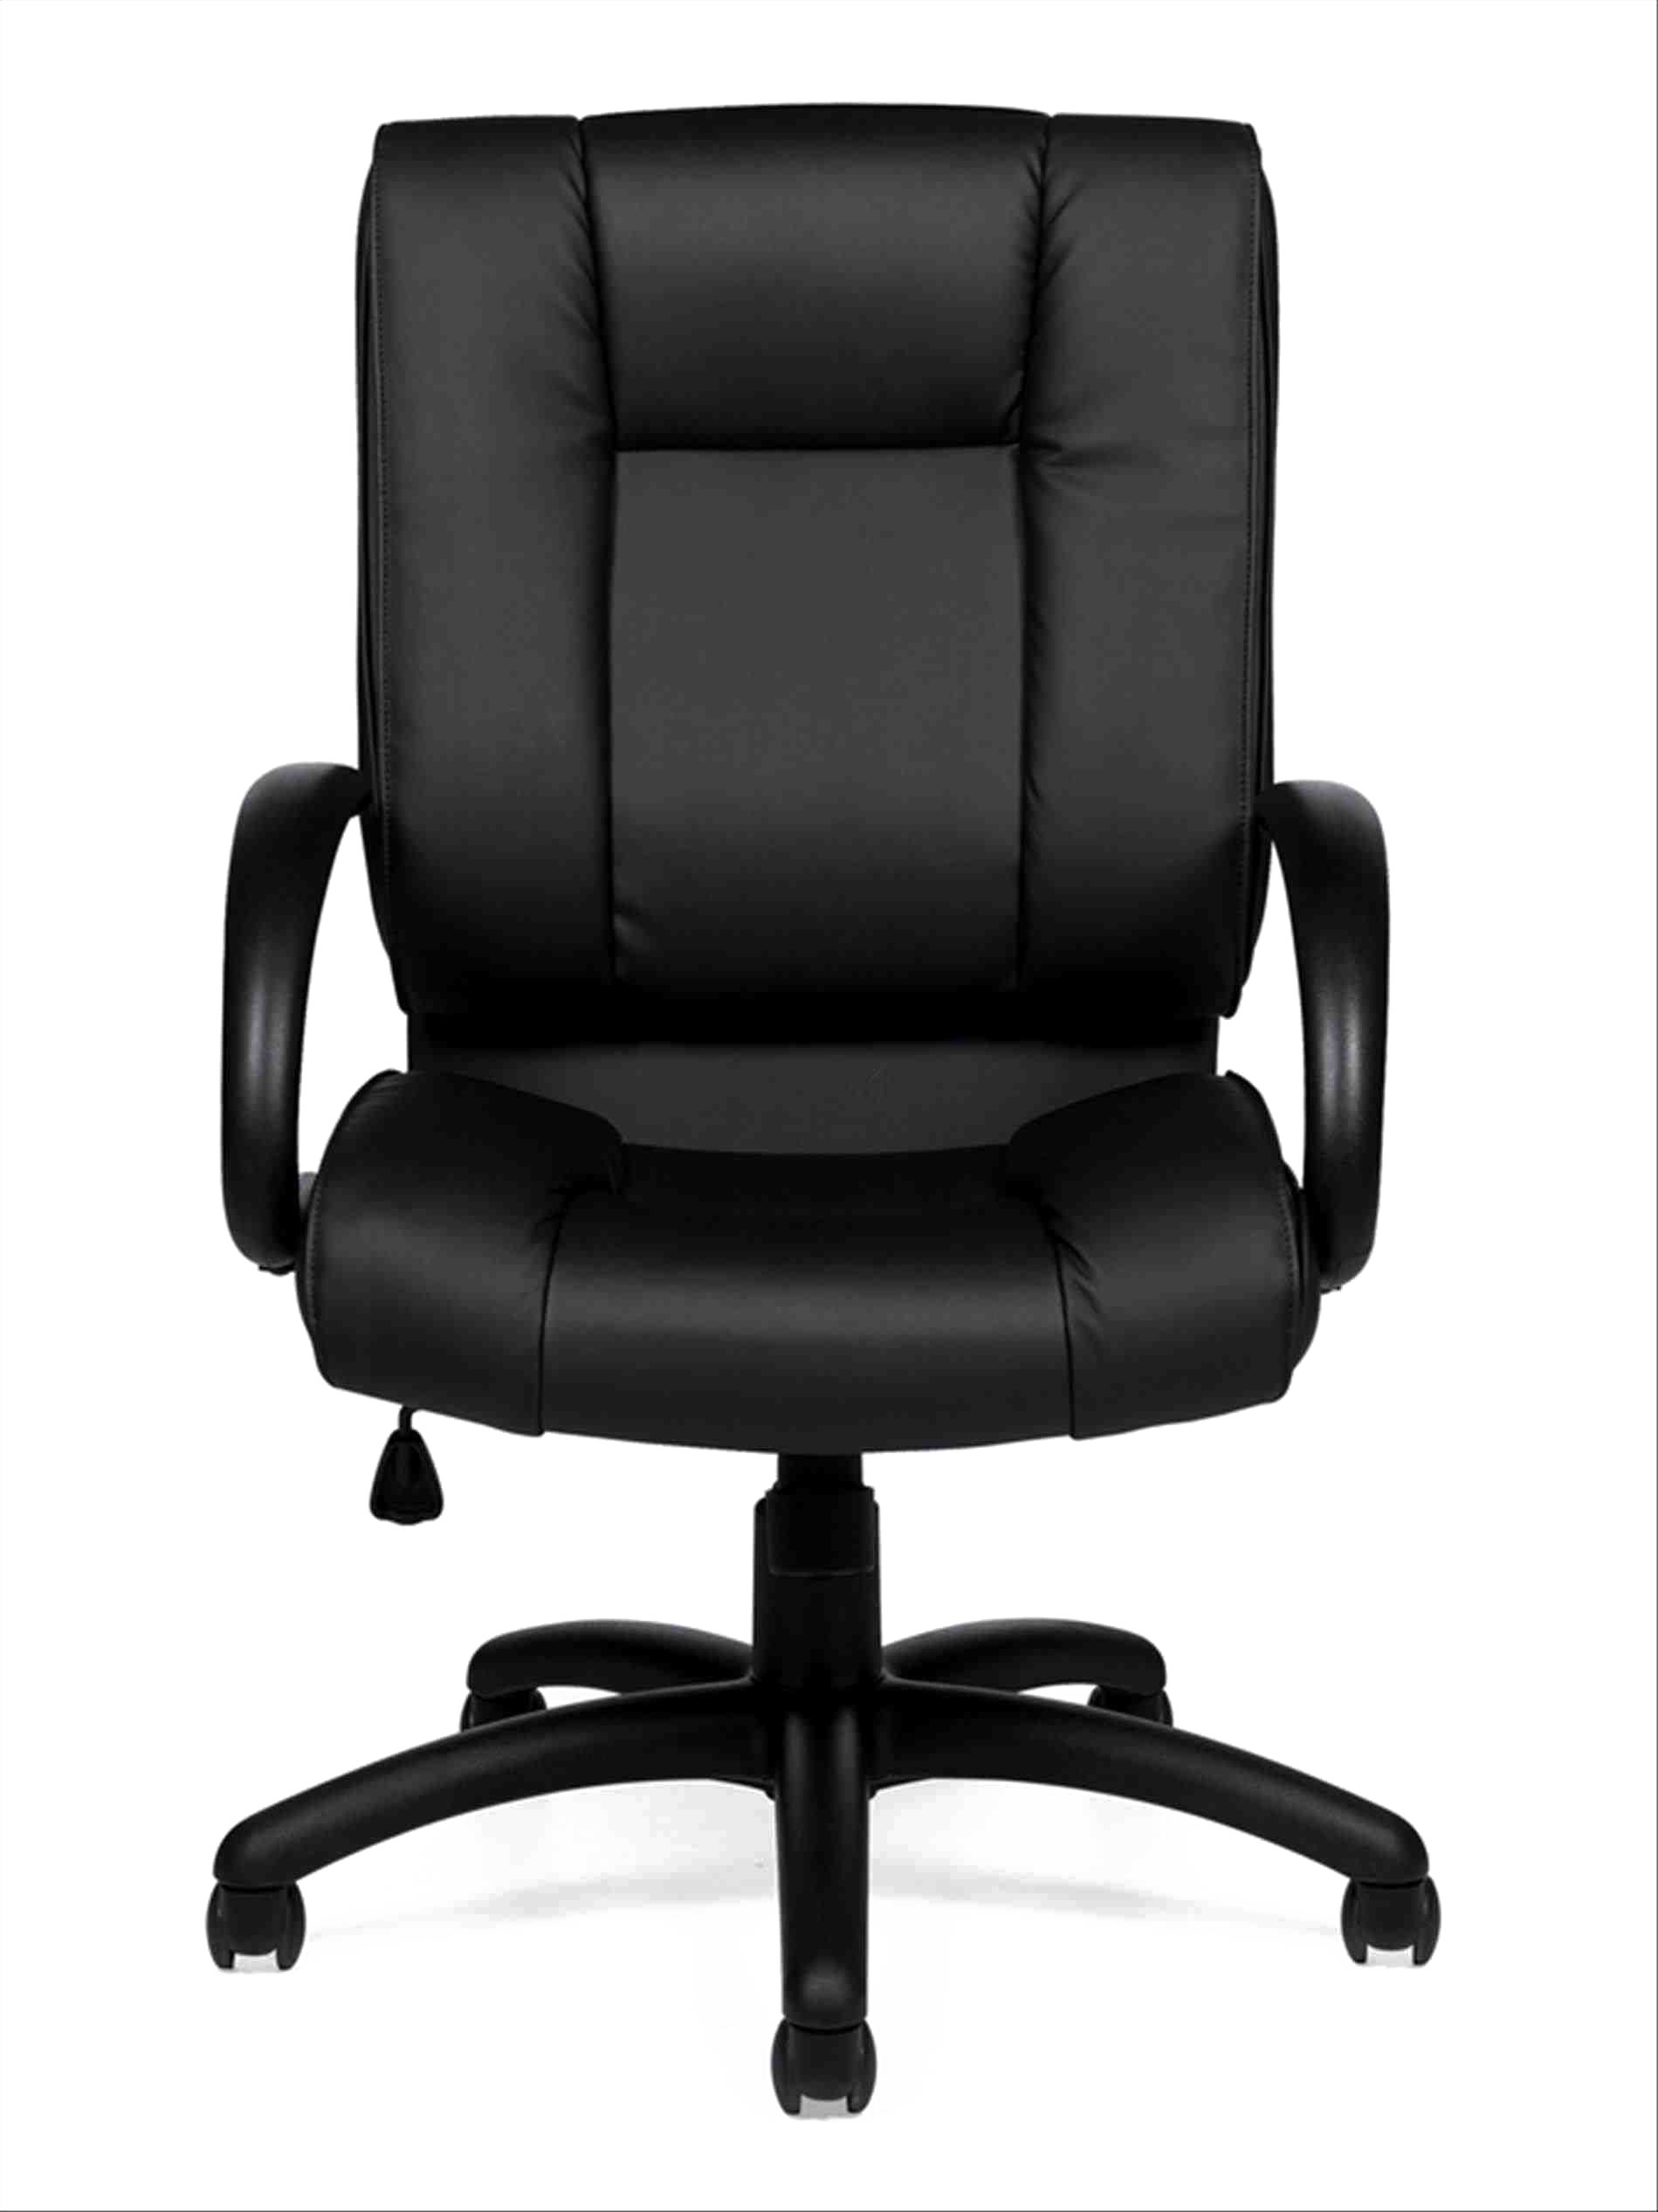 Office Chair Image Free Photo PNG PNG Image